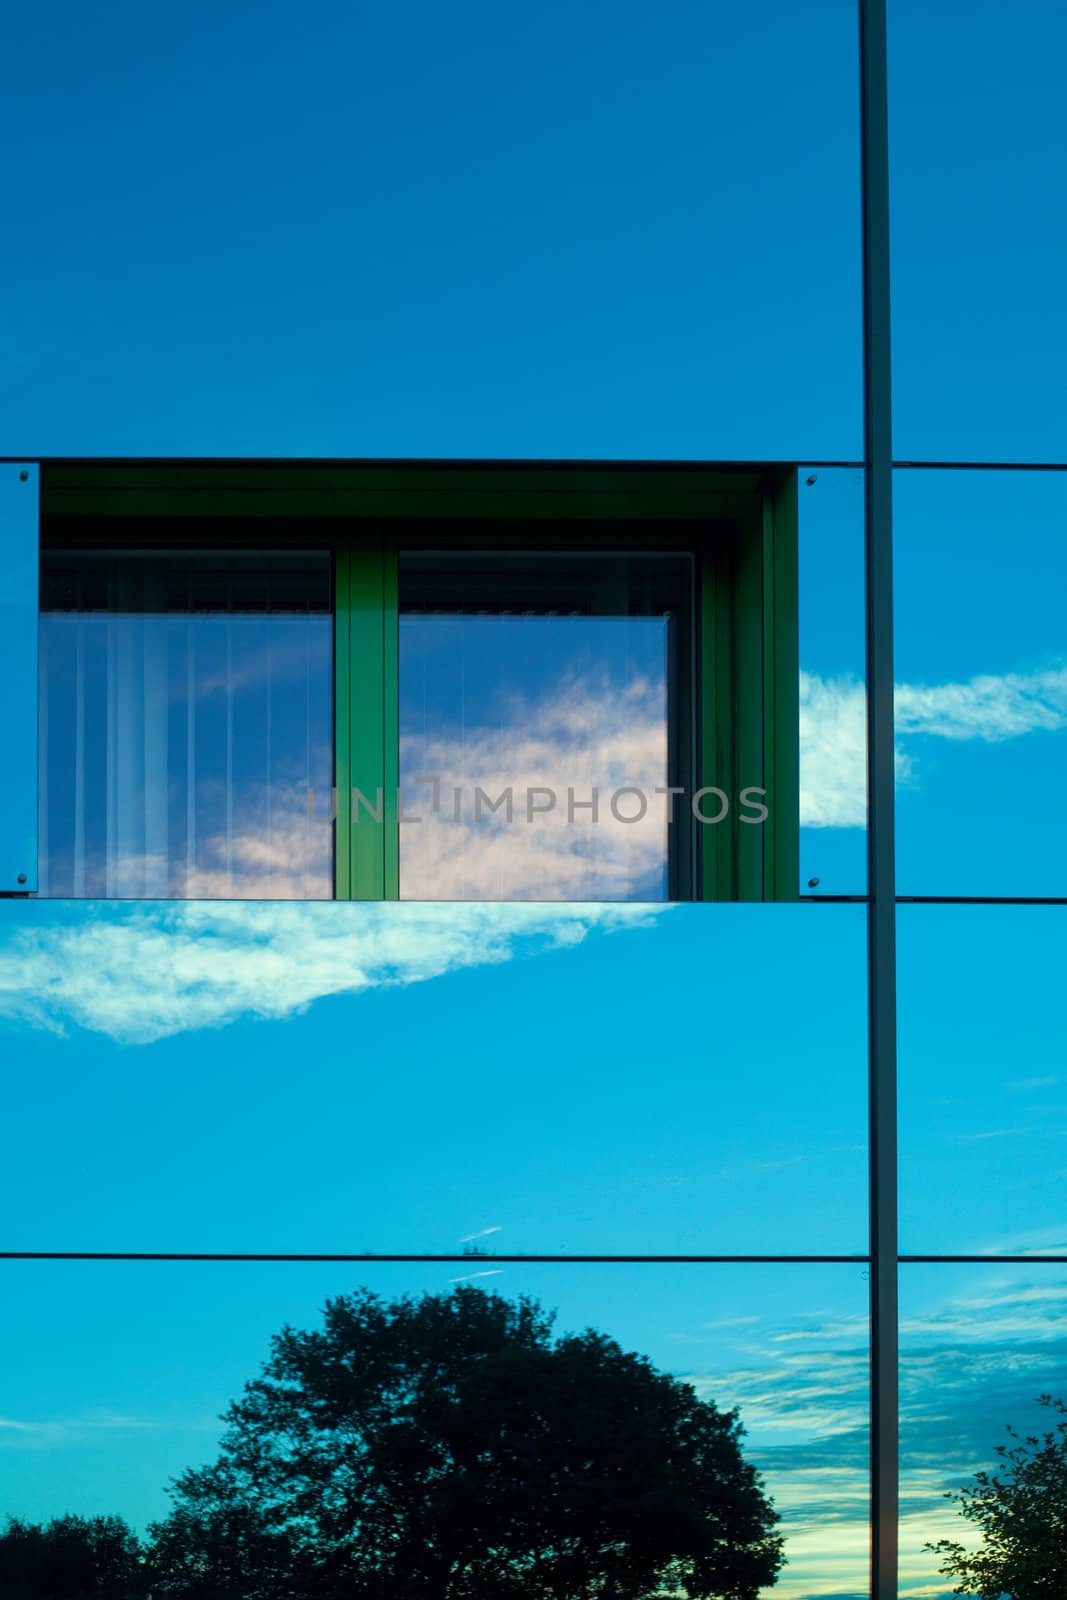 Mirrored image of environment of office building on highly reflective exterior wall with window.